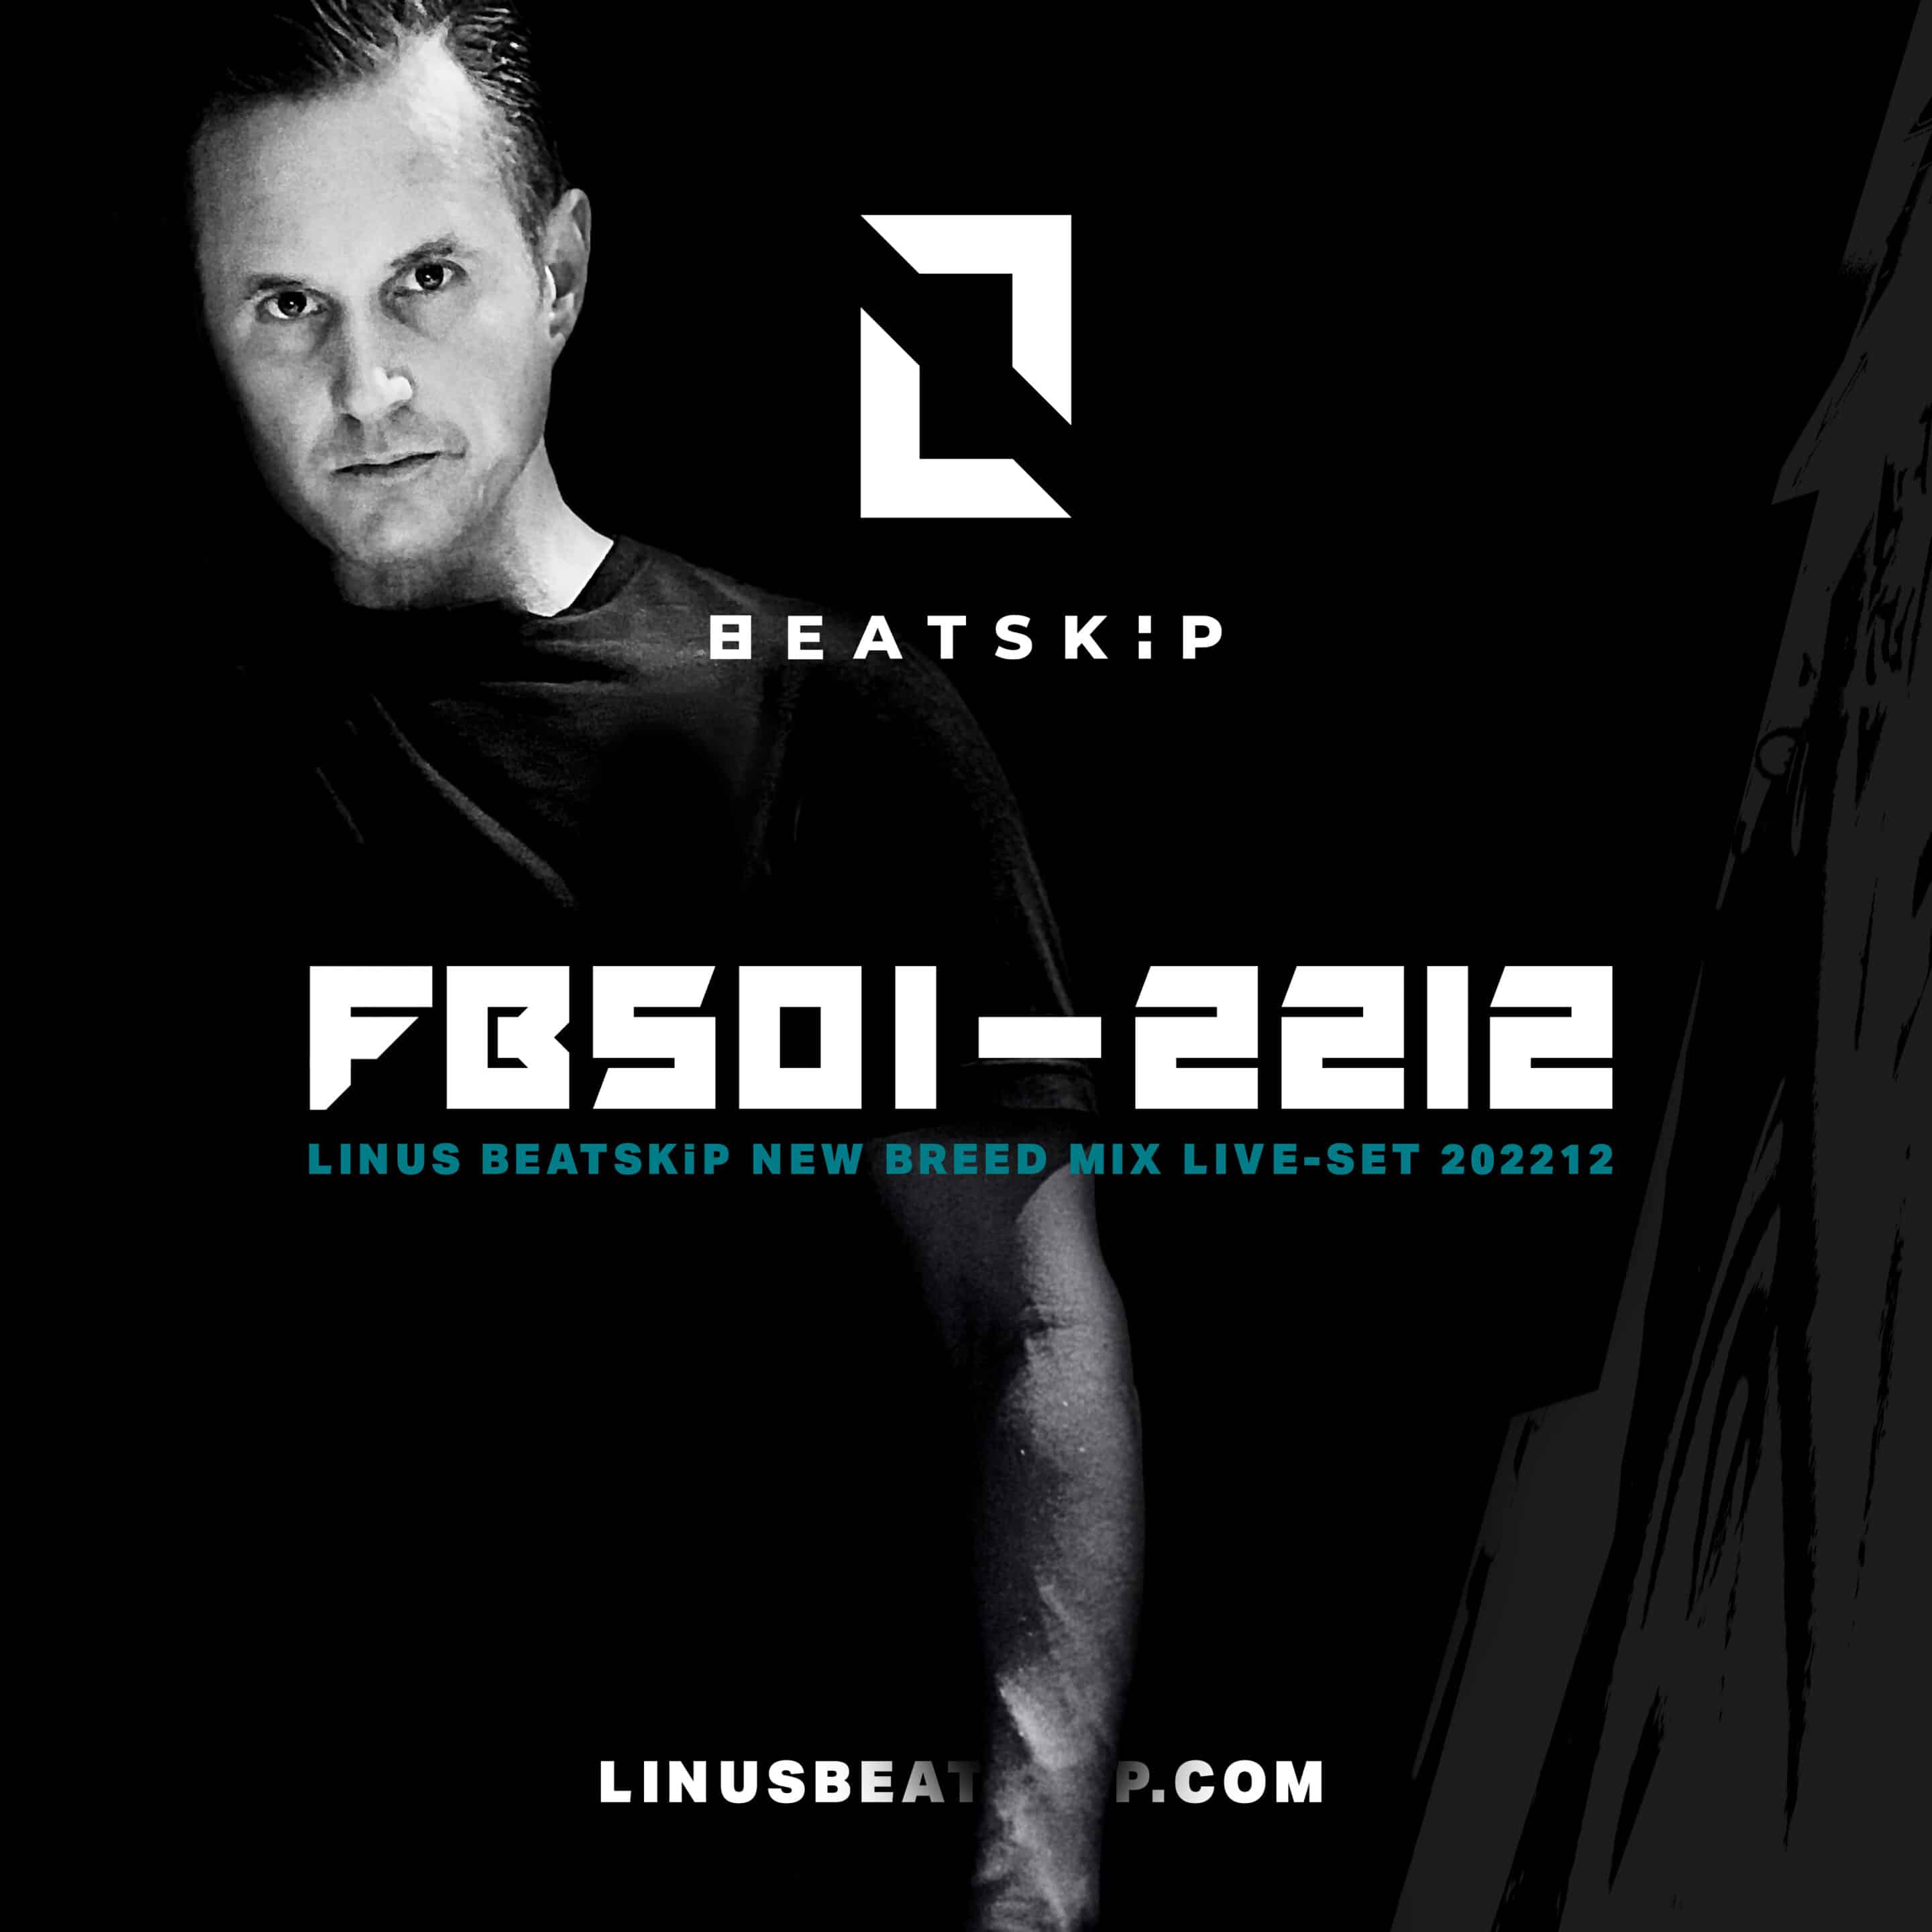 DJ MIX: FBS02-2212 short LIVE Mix Set from LINUS BEATSKIP New Breed release included. Frequencies of Beatskip